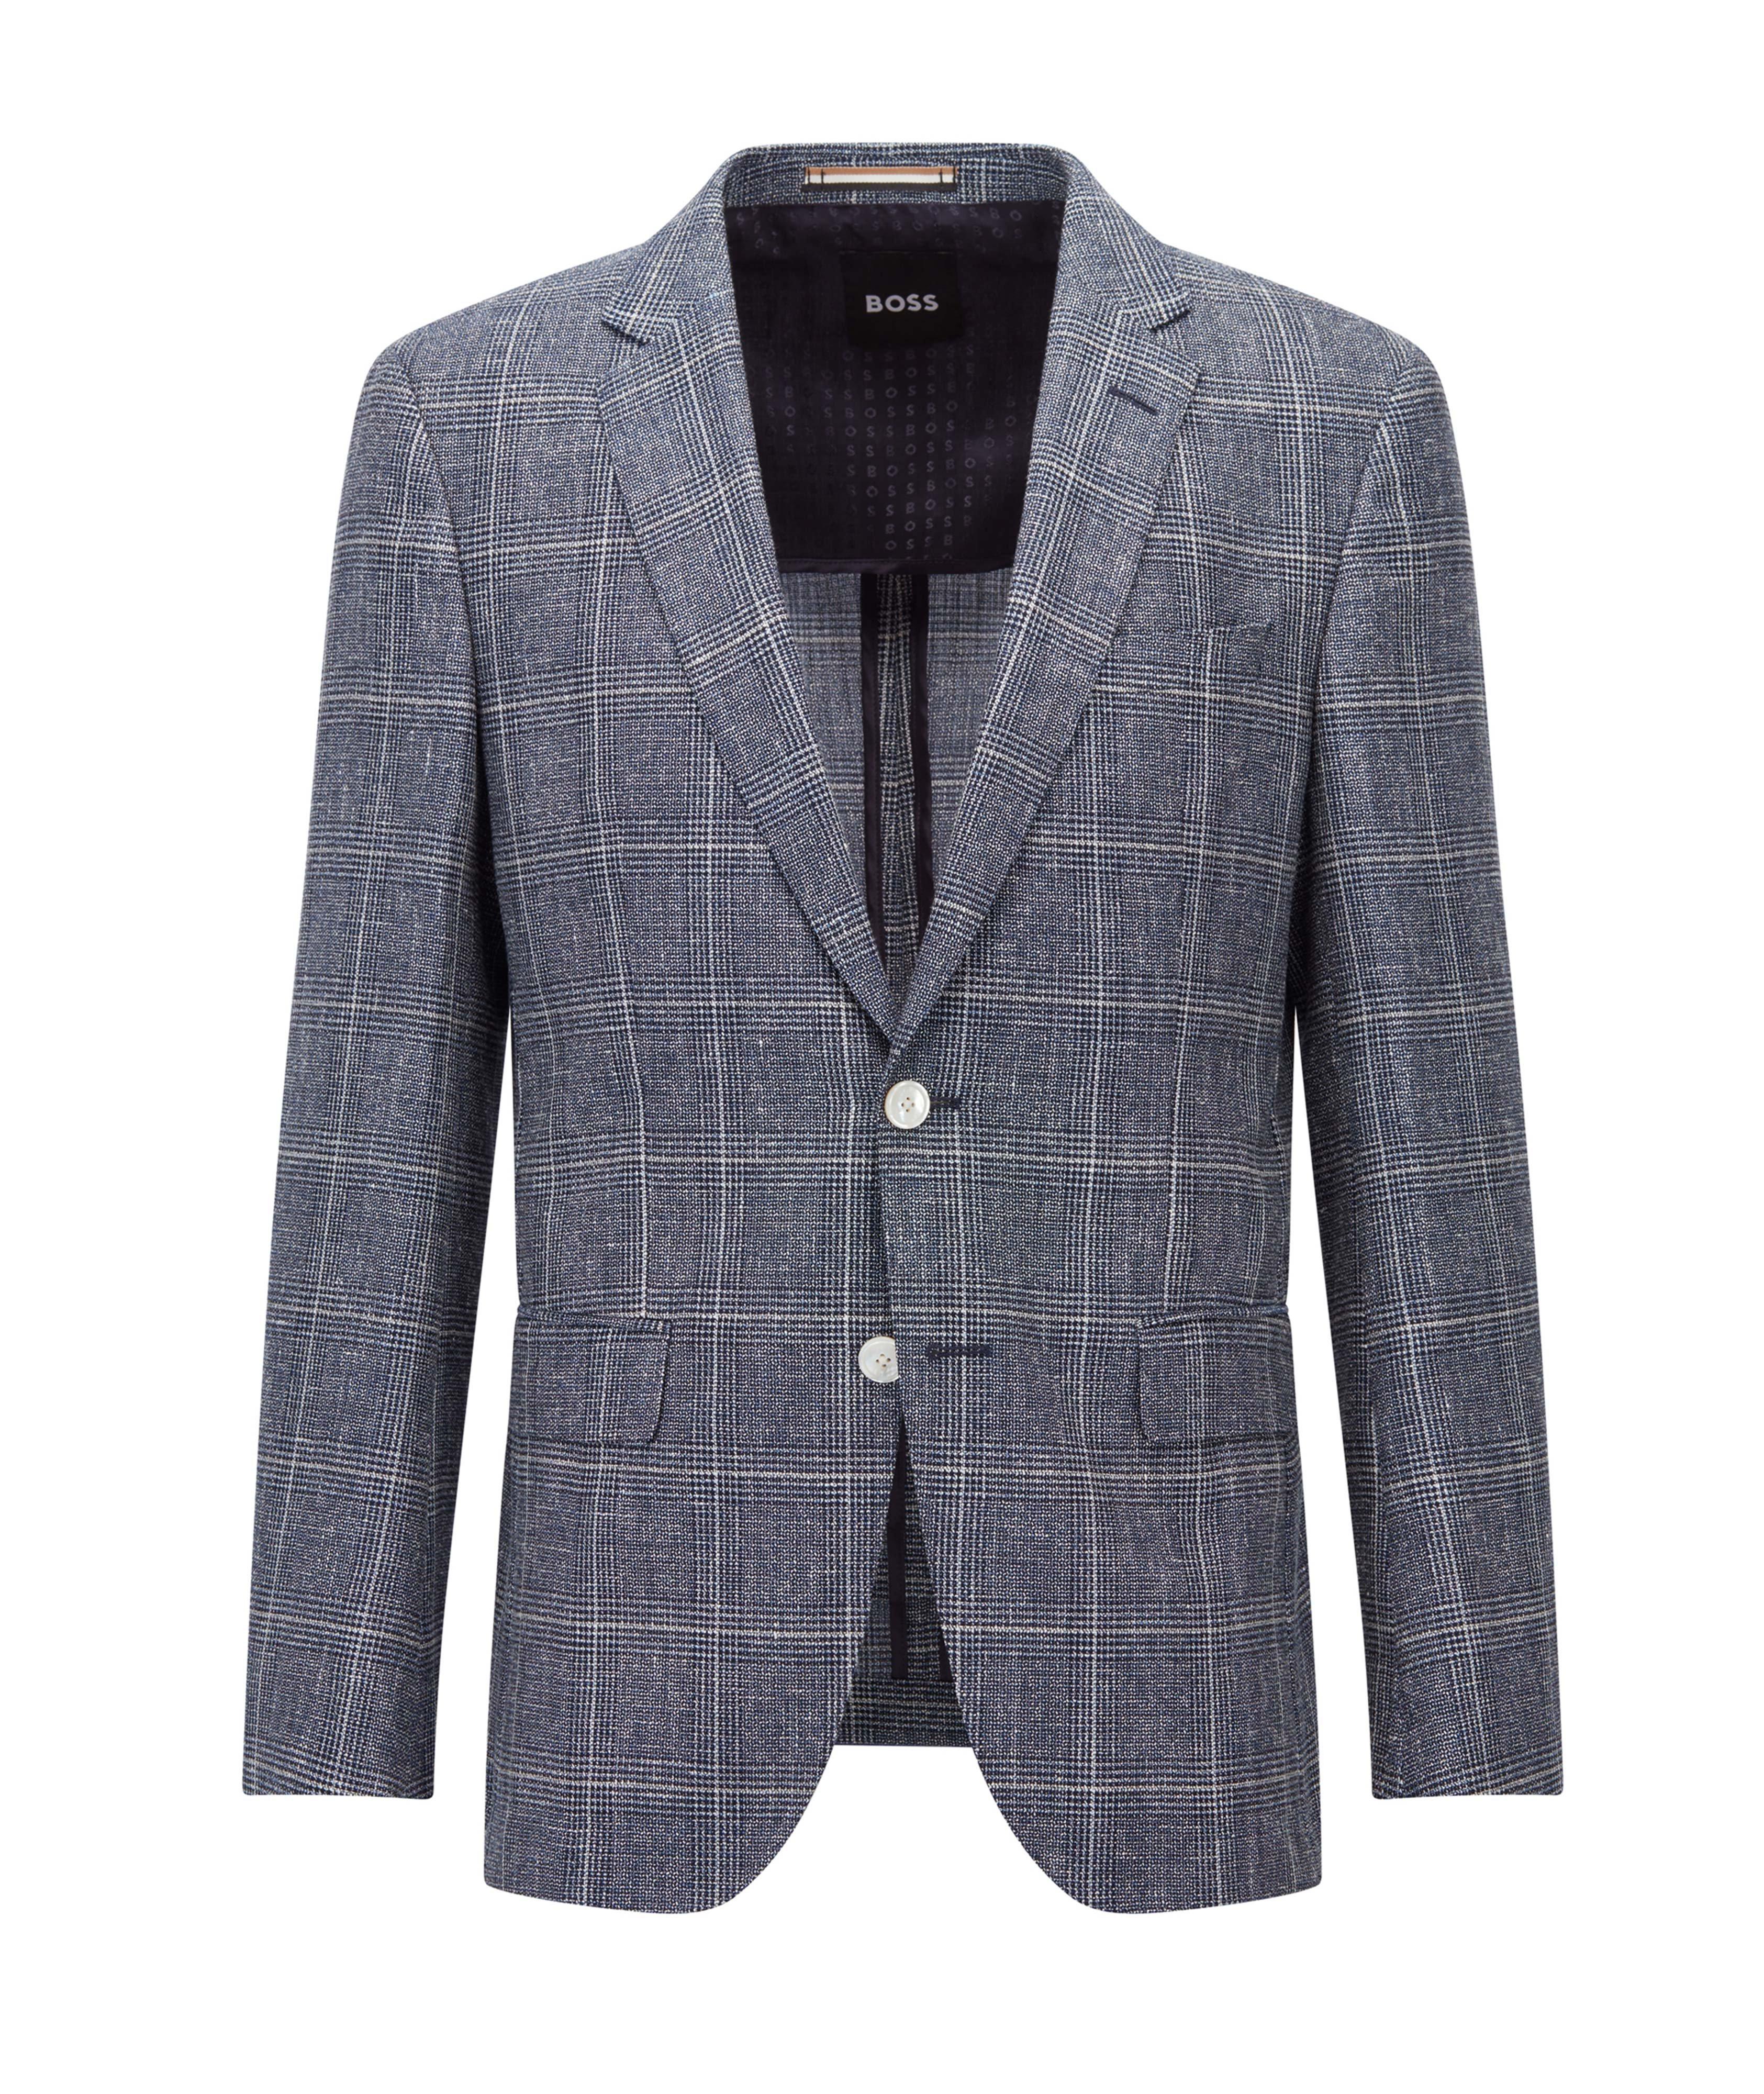 Slim-Fit Wool Linen Check Sports Jacket image 0